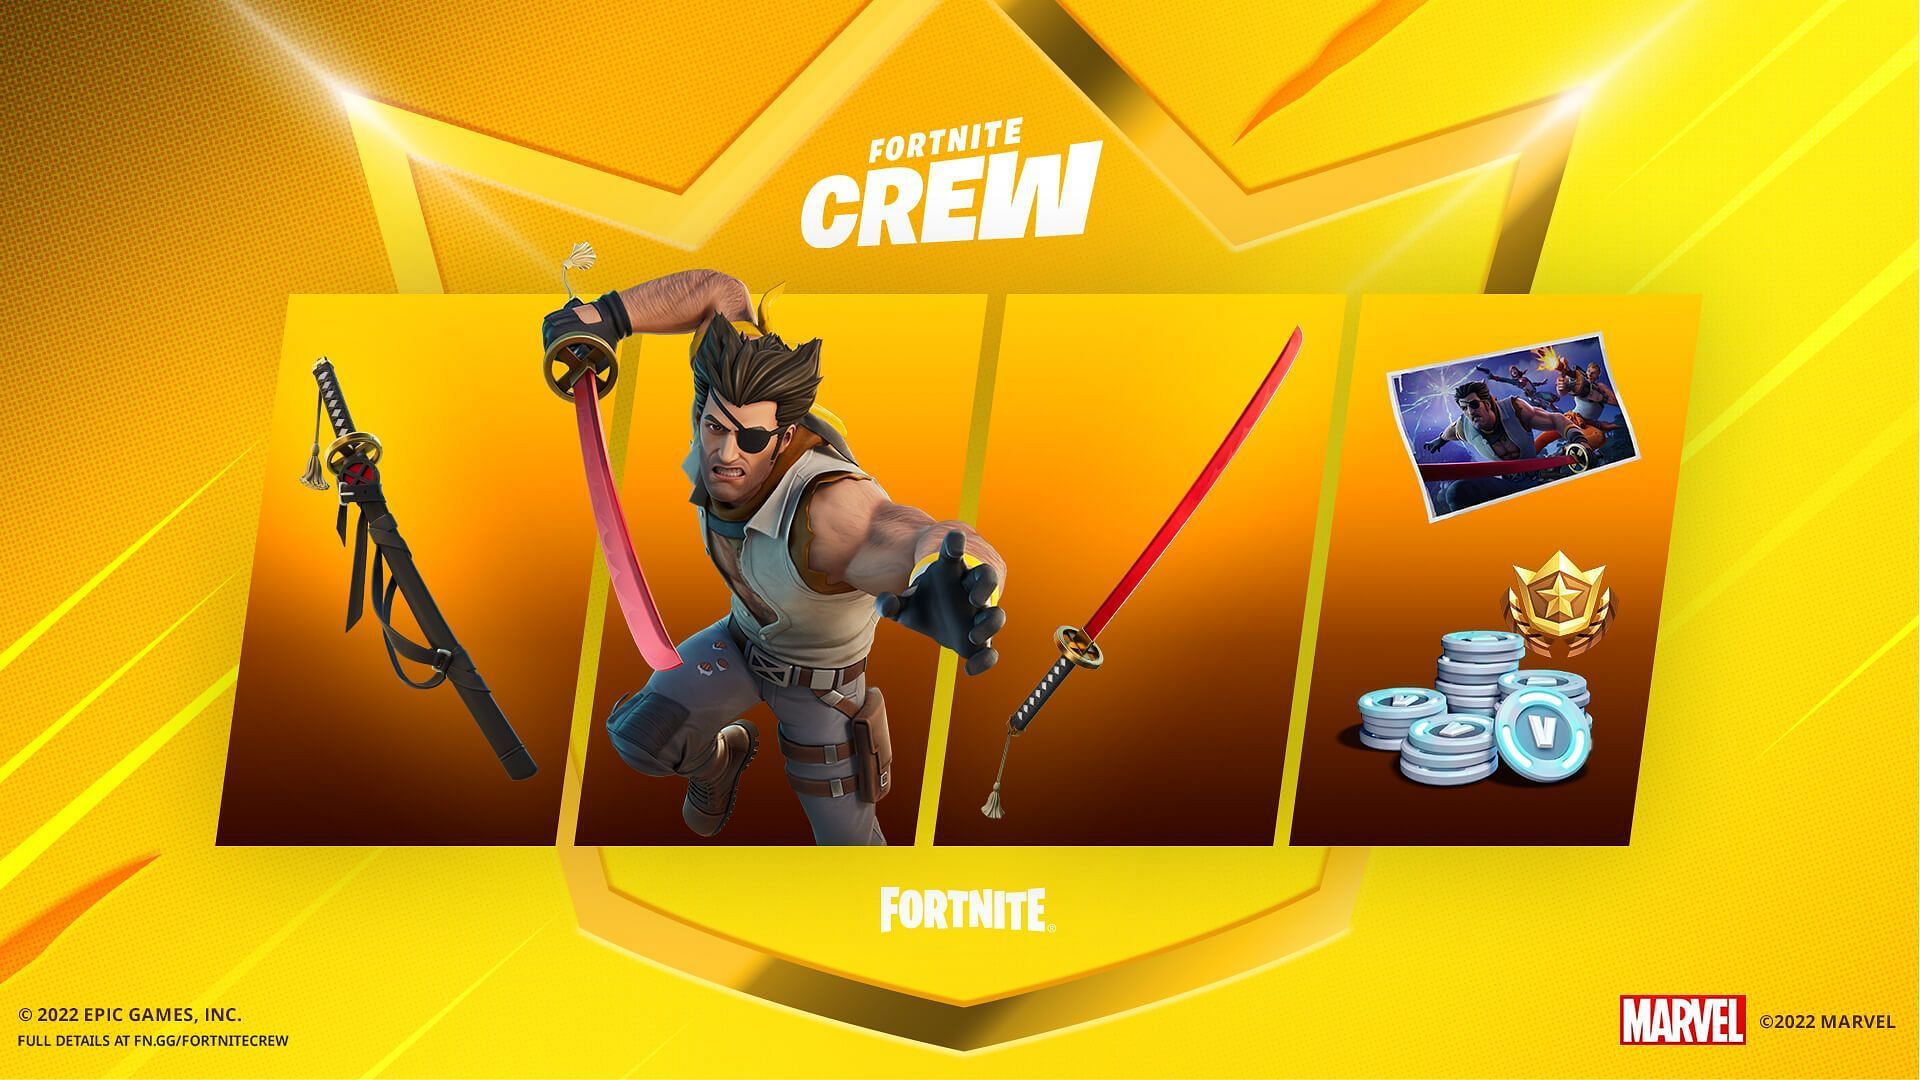 Wolverine was a Crew skin from August 2022 (Image via Epic Games)